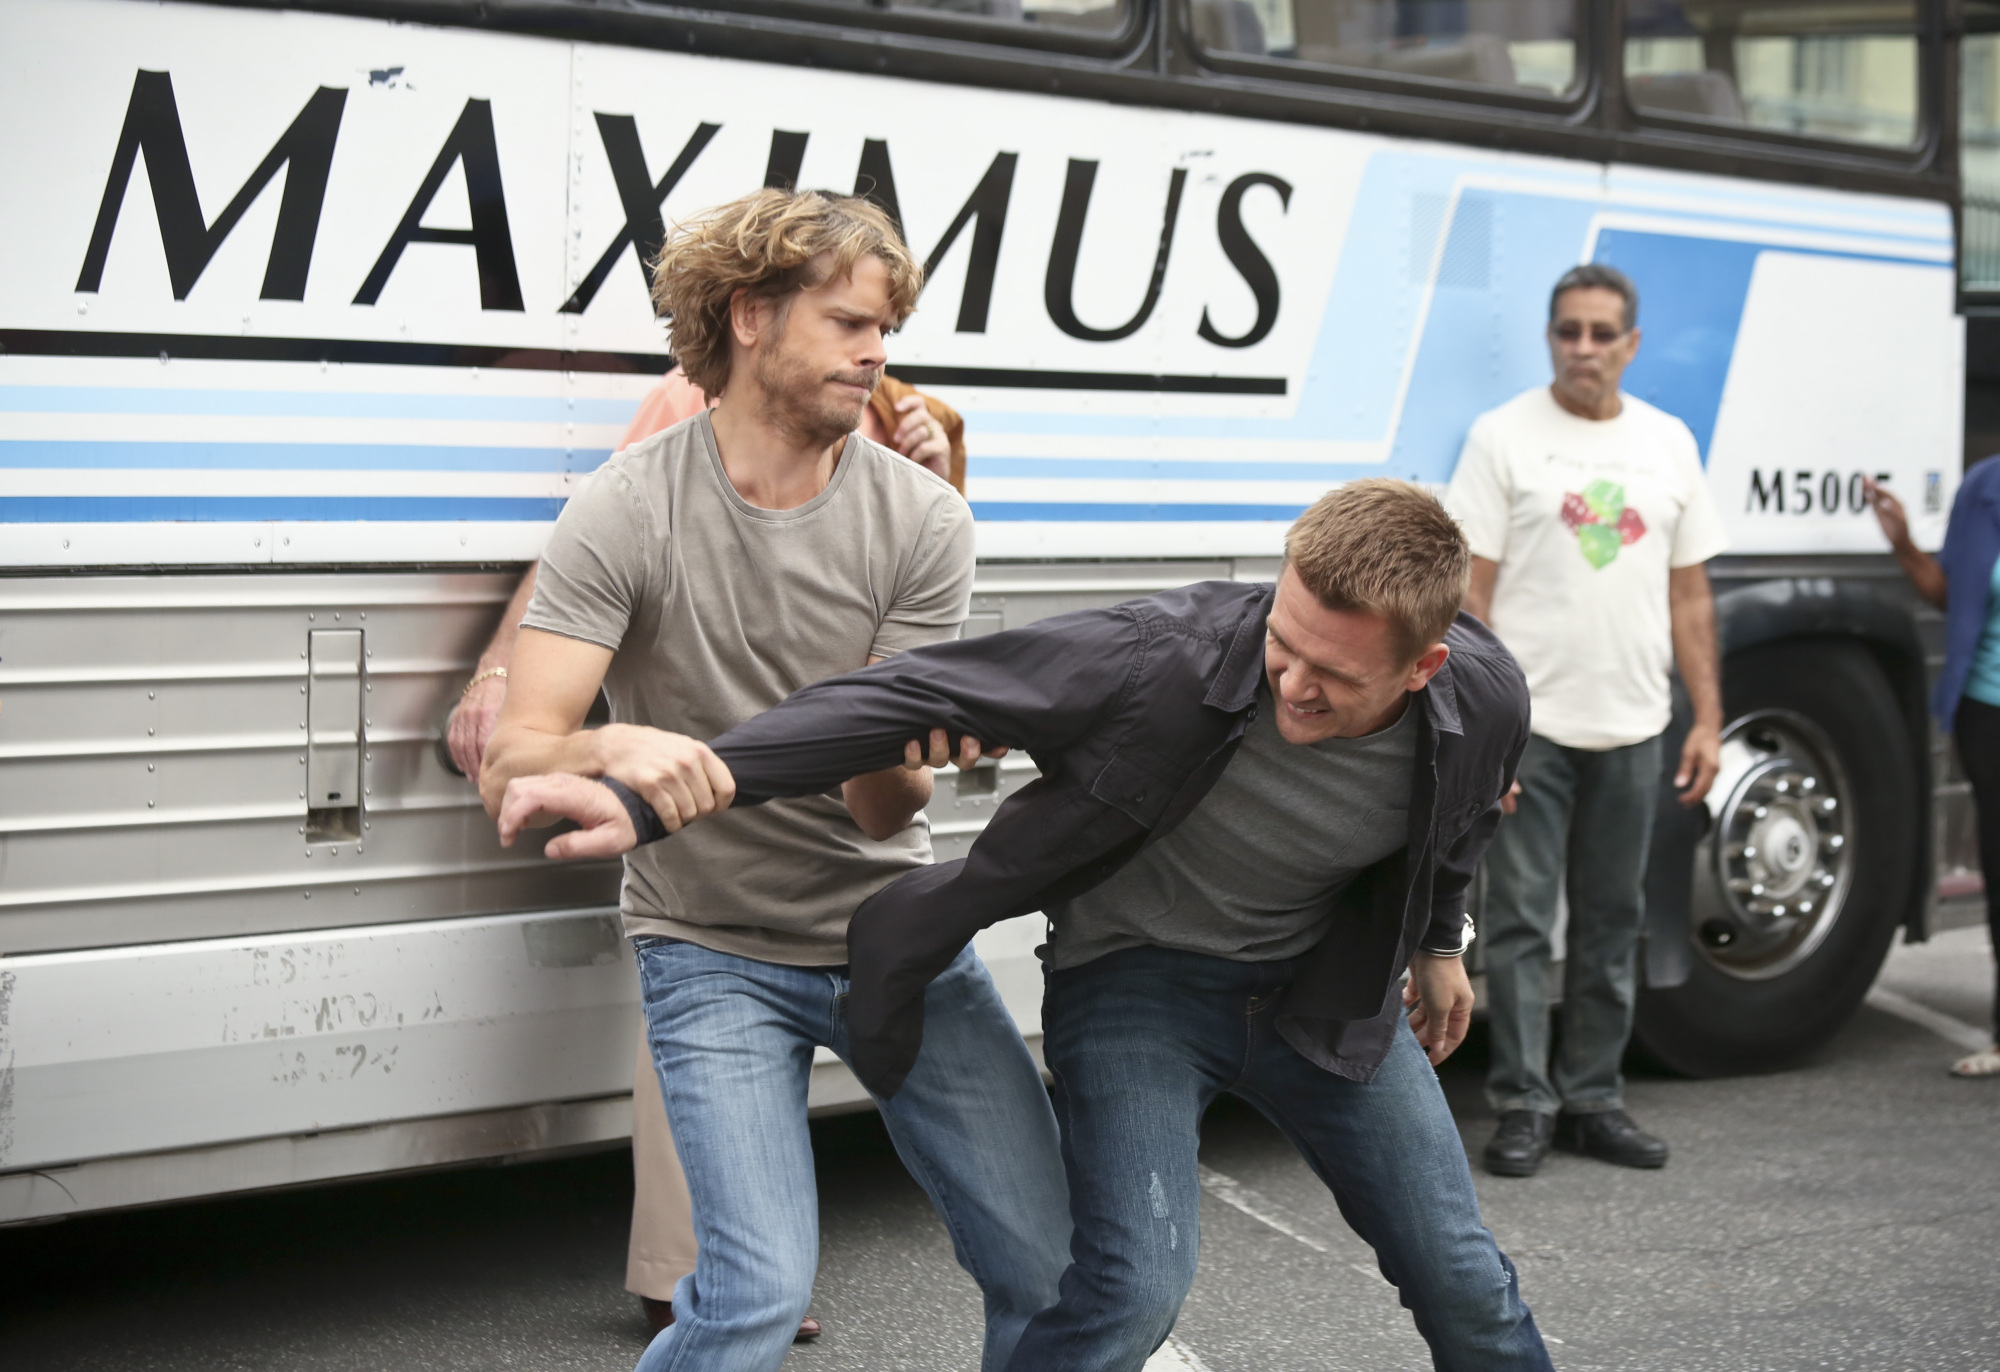 NCIS Los Angeles Season Five Episode Four "The Livelong Day" Promo Picture